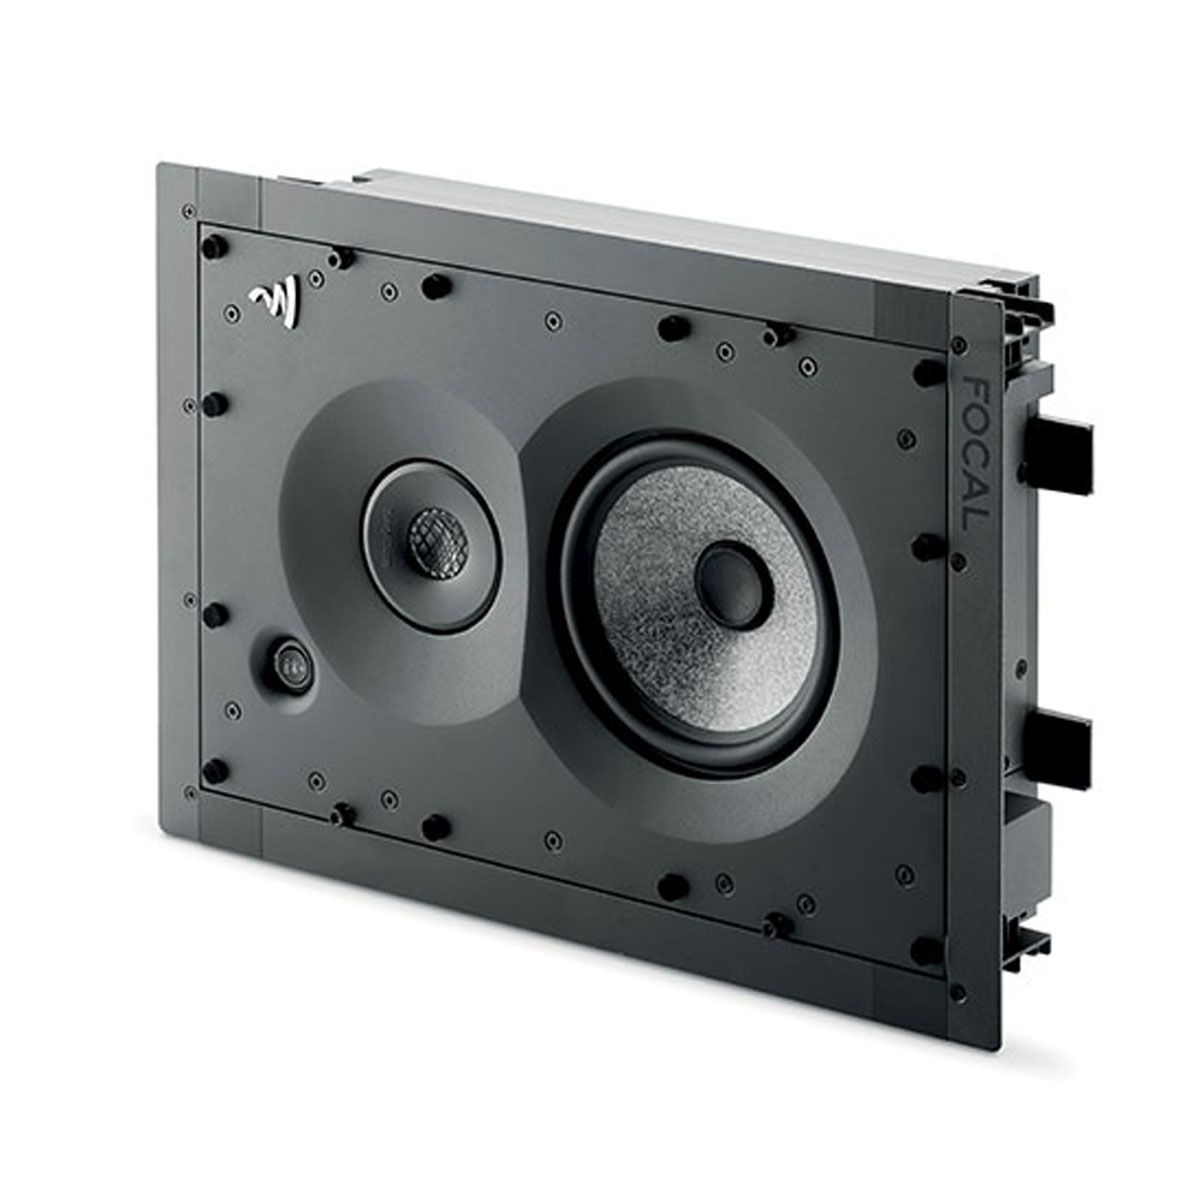 Focal 1000 IW6 In-Wall Loudspeaker angled front view mounted horizontally